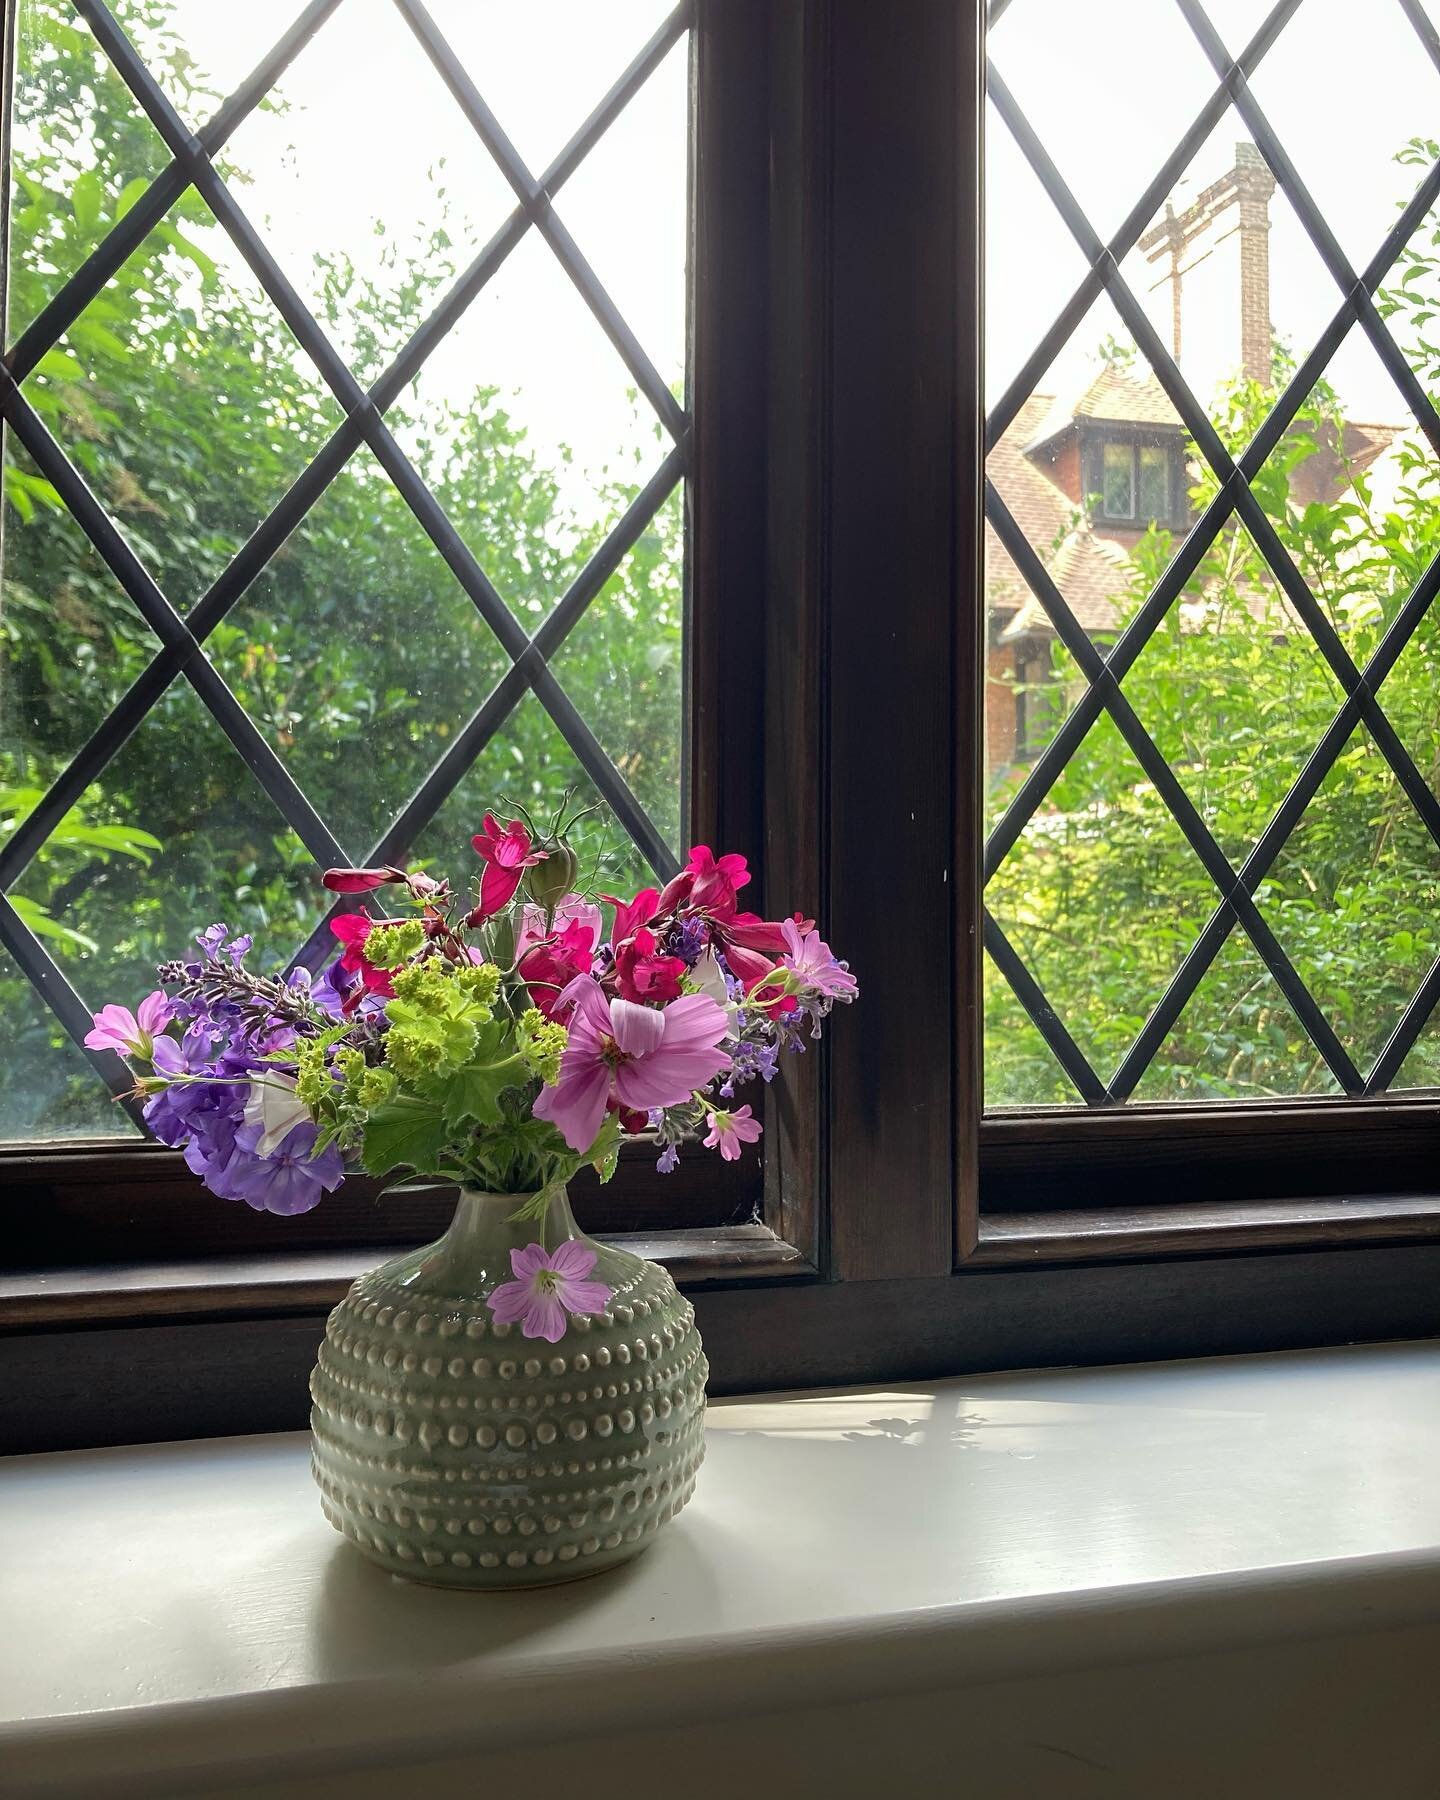 Hand picked flowers from the garden&hellip;